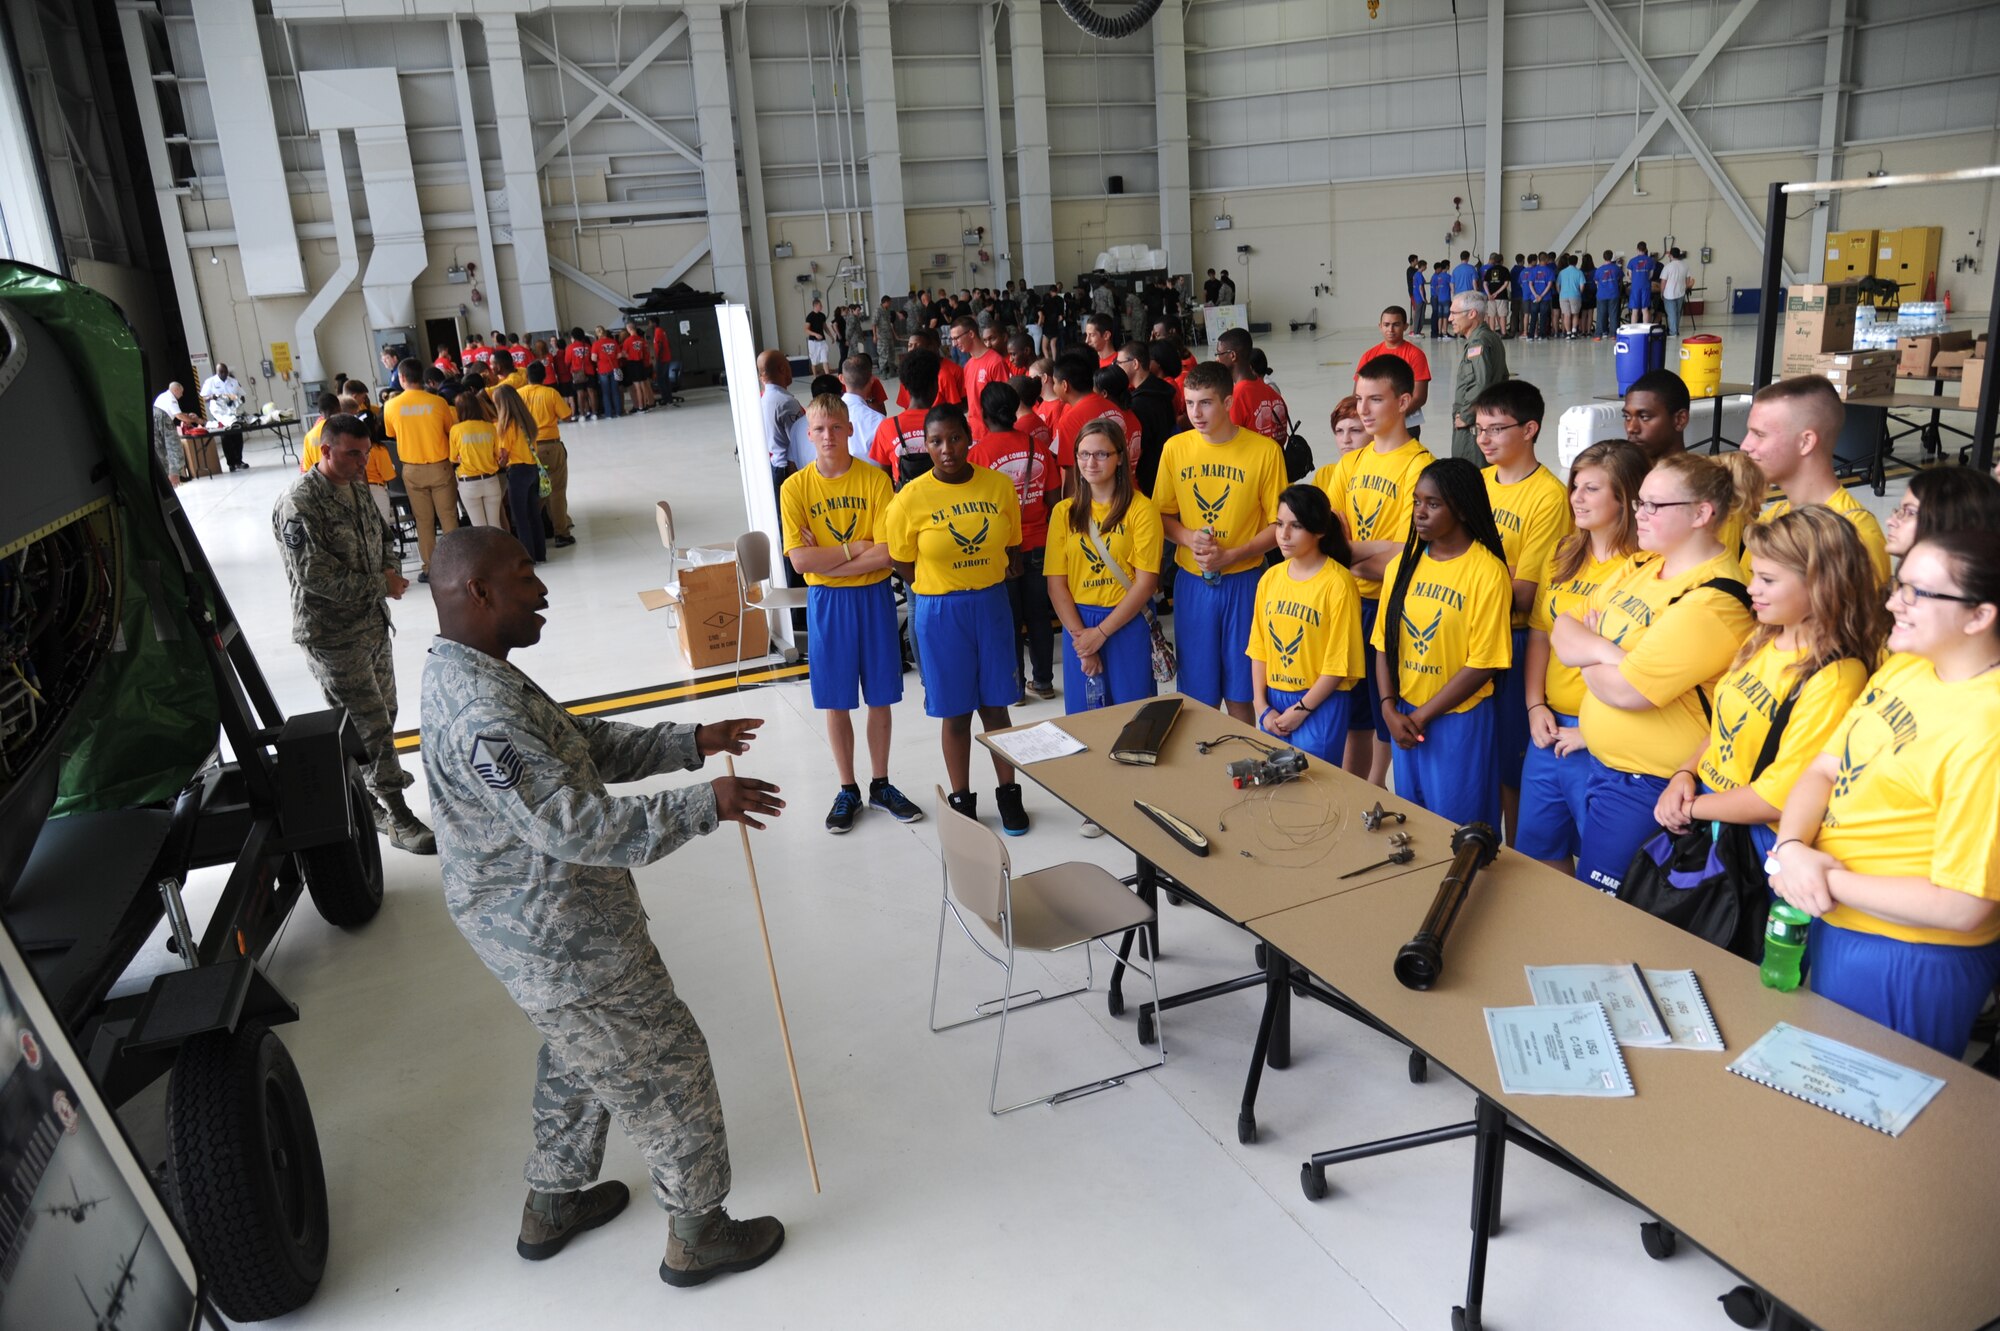 Master Sgt. Donald Maloid, 403rd Maintenance Squadron, briefs on the duties of  the Hurricane Hunters, to St. Martin High School Junior ROTC students during STEM (science, technology, engineering and mathematics) Diversity Outreach Day Sept. 19, 2014, at the fuel cell hangar, Keesler Air Force Base, Miss.  The event consisted of 10 Mississippi gulf coast high school JROTC units visiting informative booths about Air Force opportunities and accession requirements with an emphasis on STEM.  (U.S. Air Force photo by Kemberly Groue)